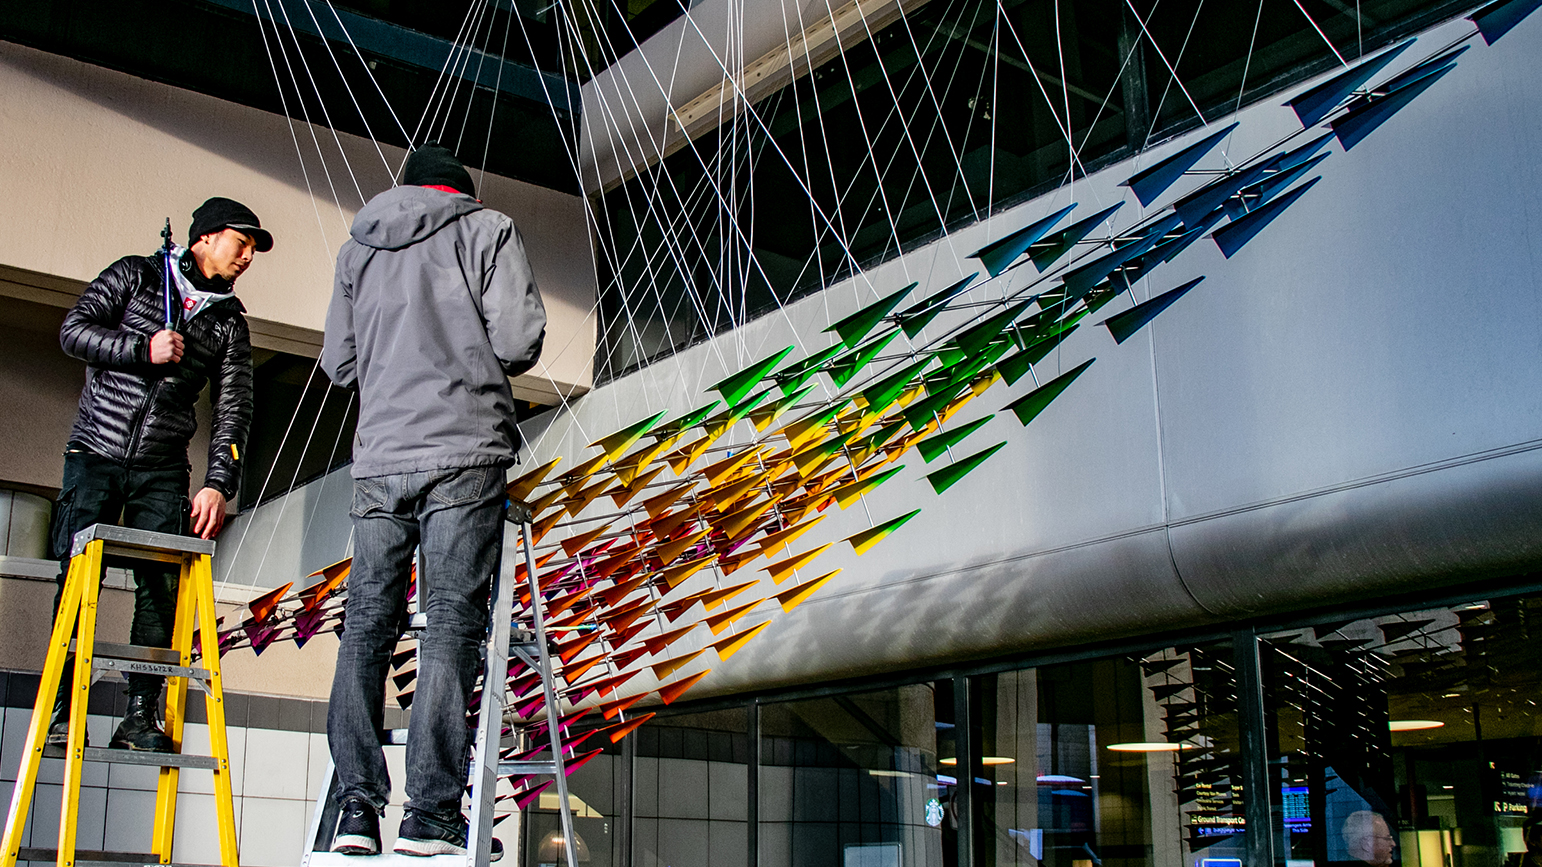 Image showing two people on ladders adding wiring to a large metal sculpture of rainbow-colored paper airplanes that together make up one large paper airplane